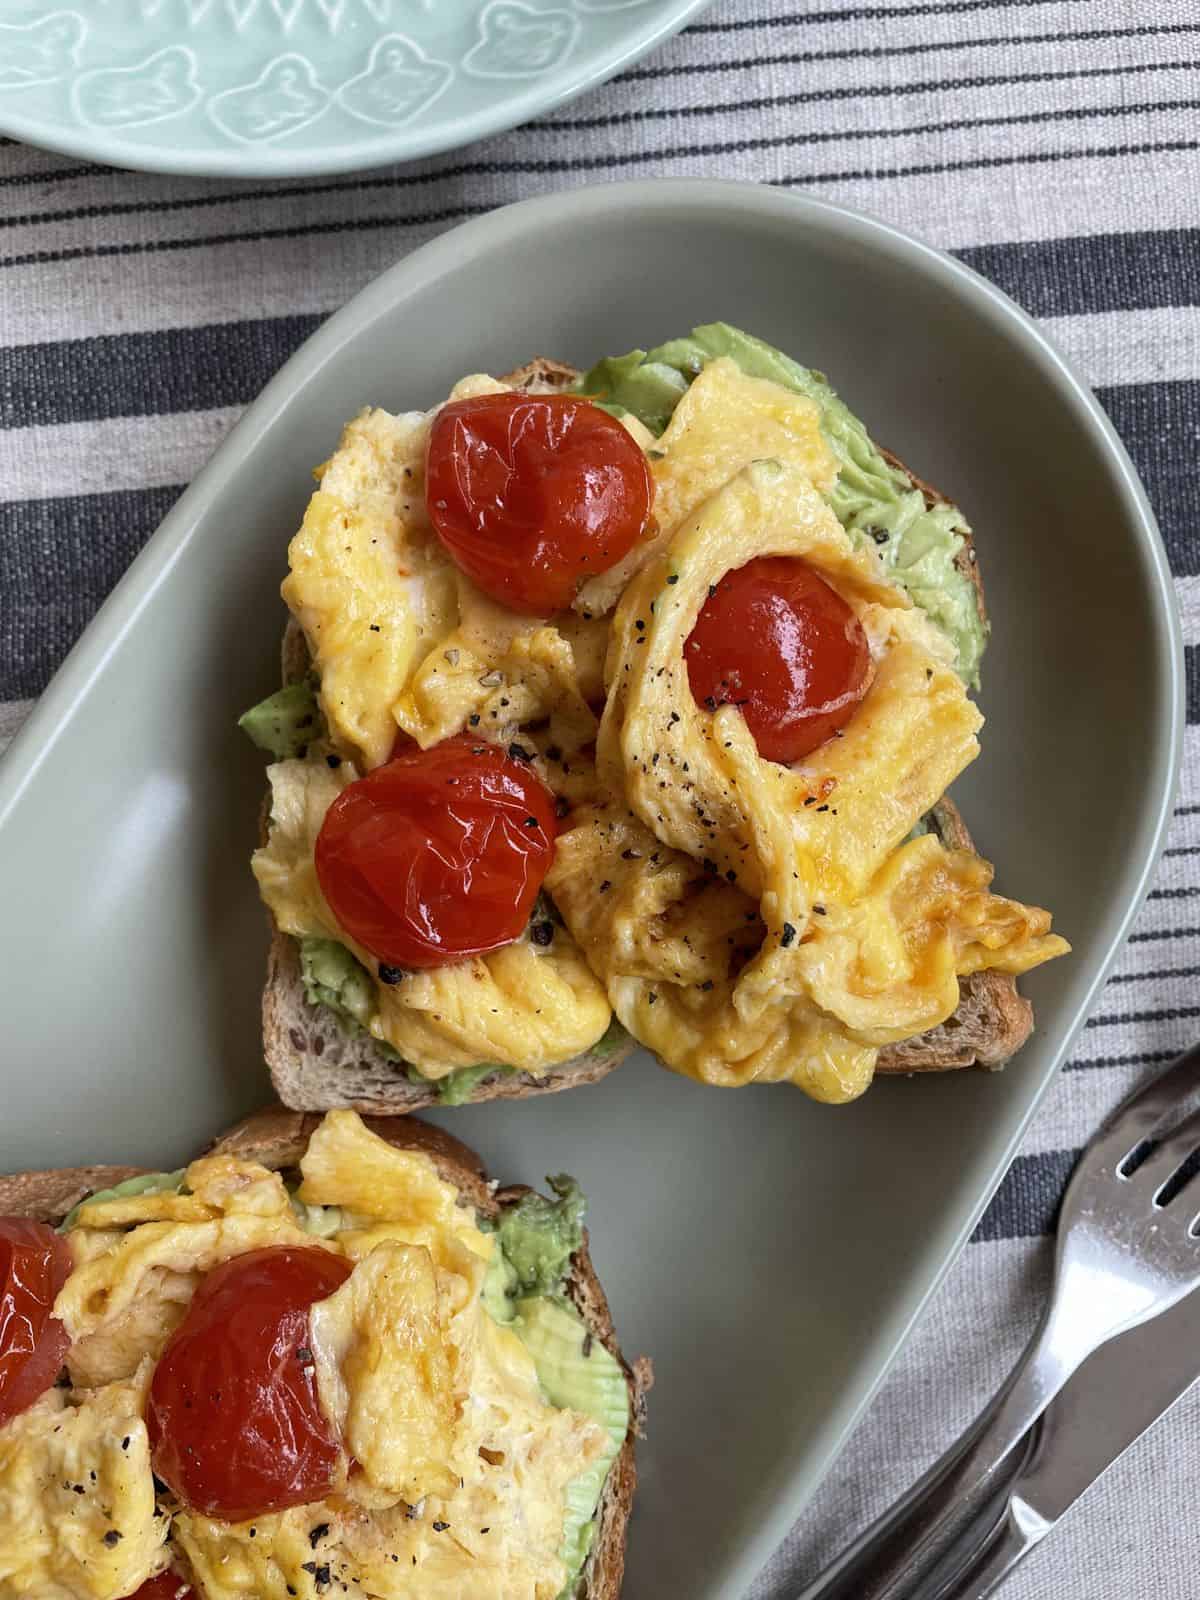 Scrambled eggs with tomatoes on a avocado toast served